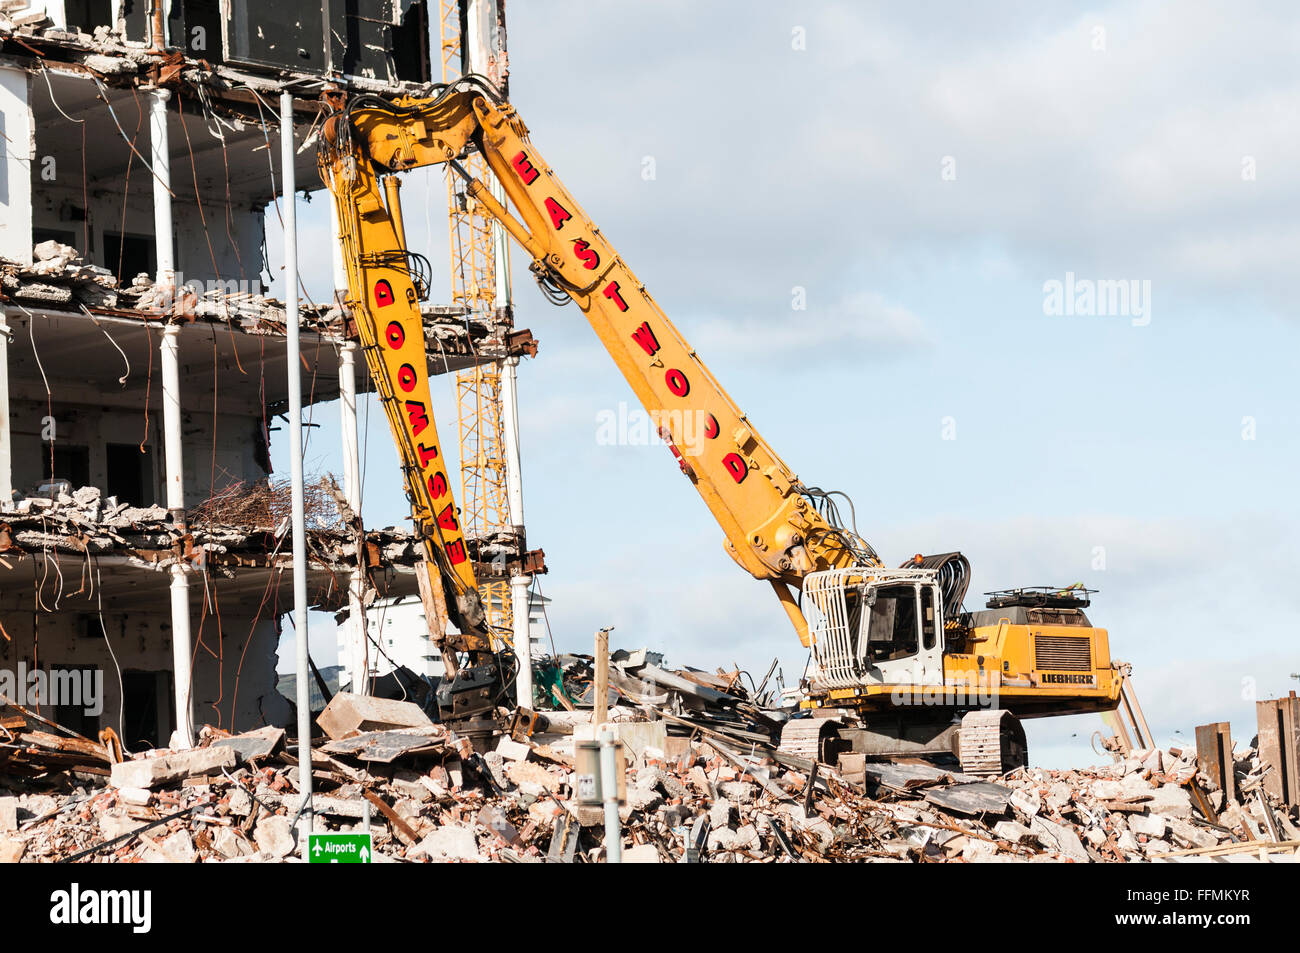 High reach excavator being used to demolish a building. Stock Photo